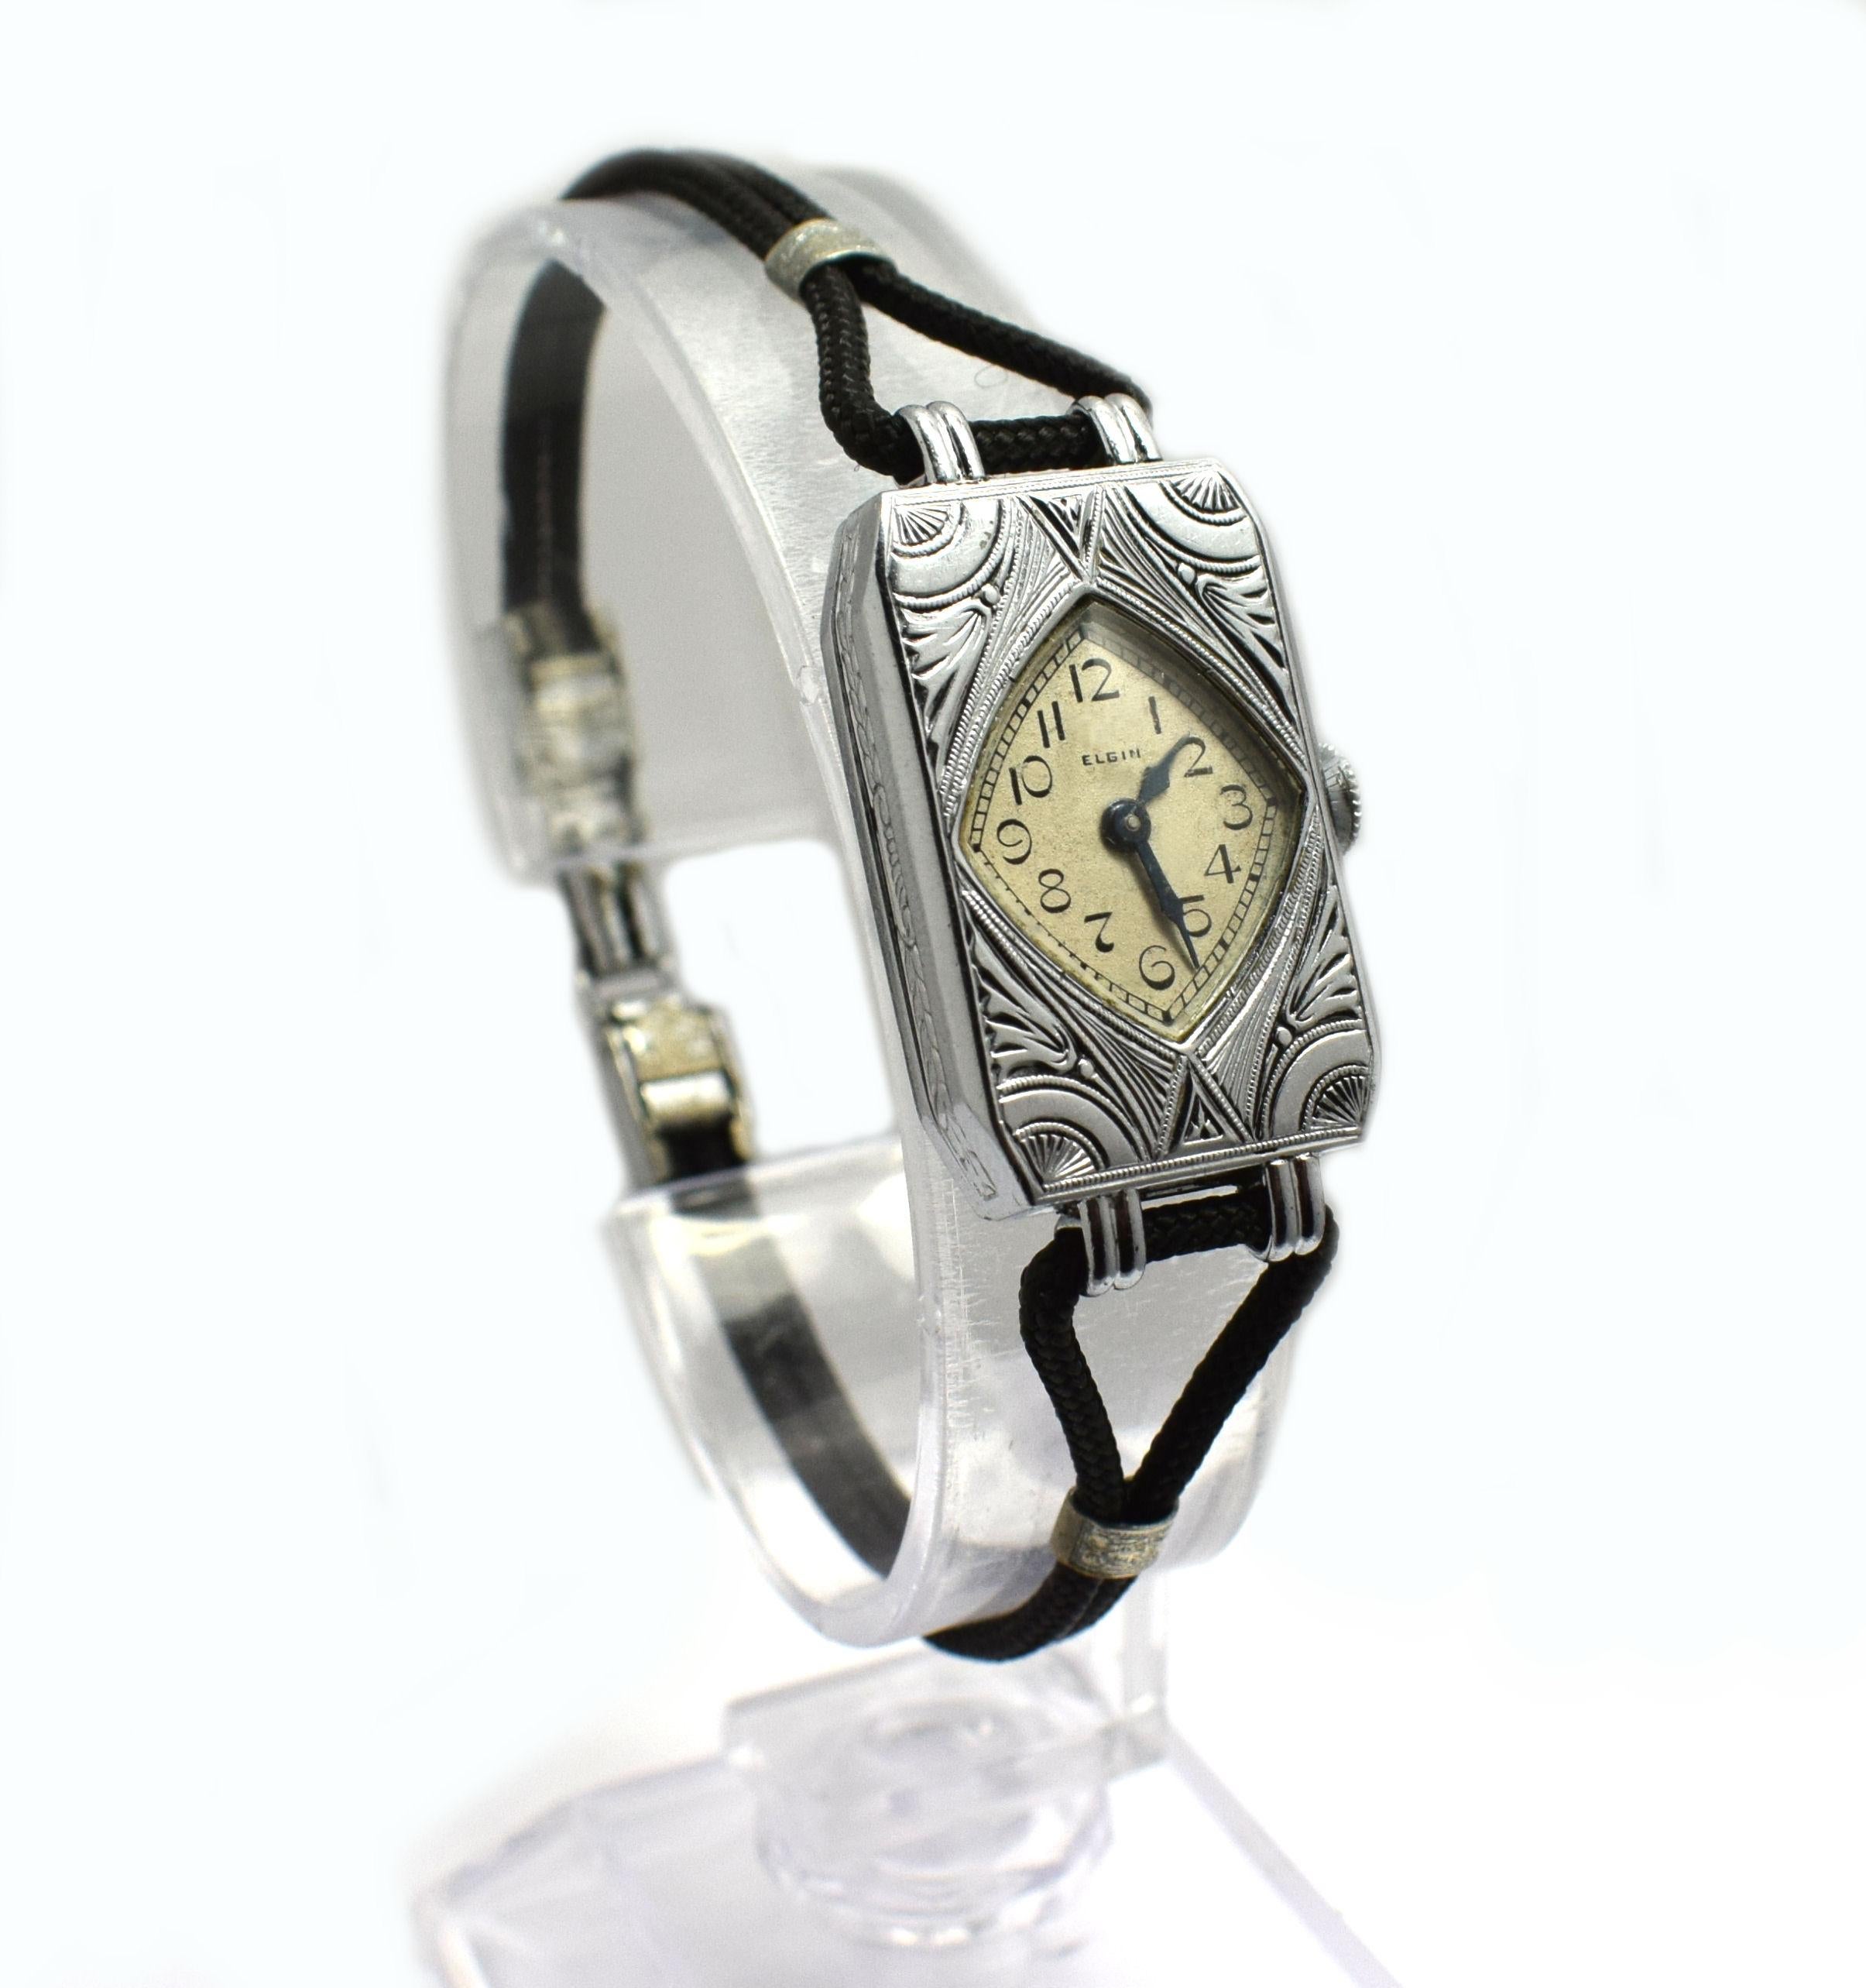 Wonderfully styled Art Deco ladies watch originating from the 1930s and made by the watchmakers Elgin. Swiss manual wind up movement, a fine classic caliber movement running well on 15 jewels having been recently serviced. Decorated with Art Deco